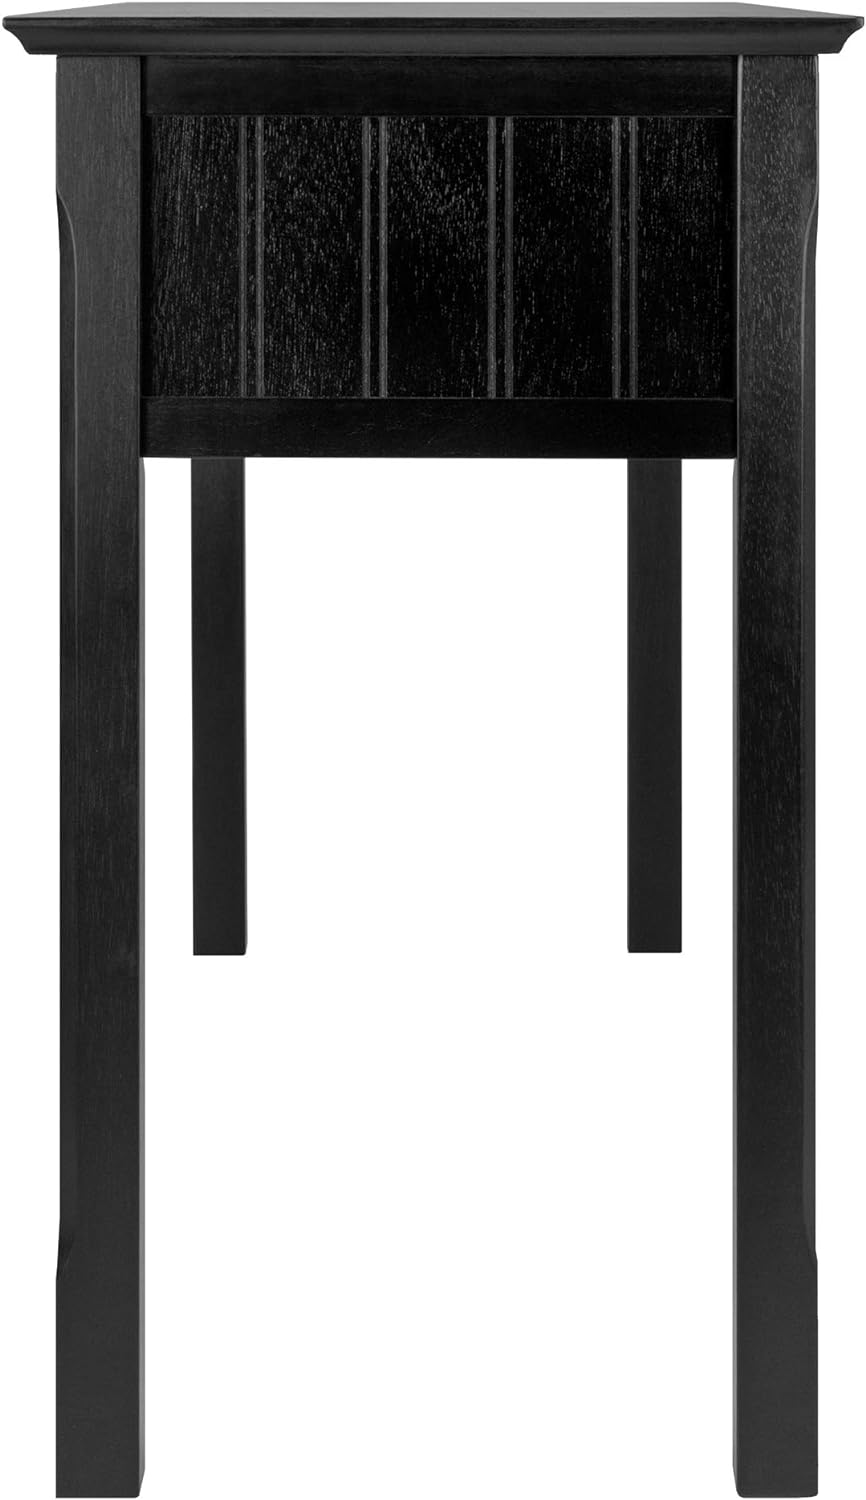 Winsome Timber 29.1 x 47.6 x 15.7-Inch Solid Beech Wood Hall/Console Table, Black (20450)